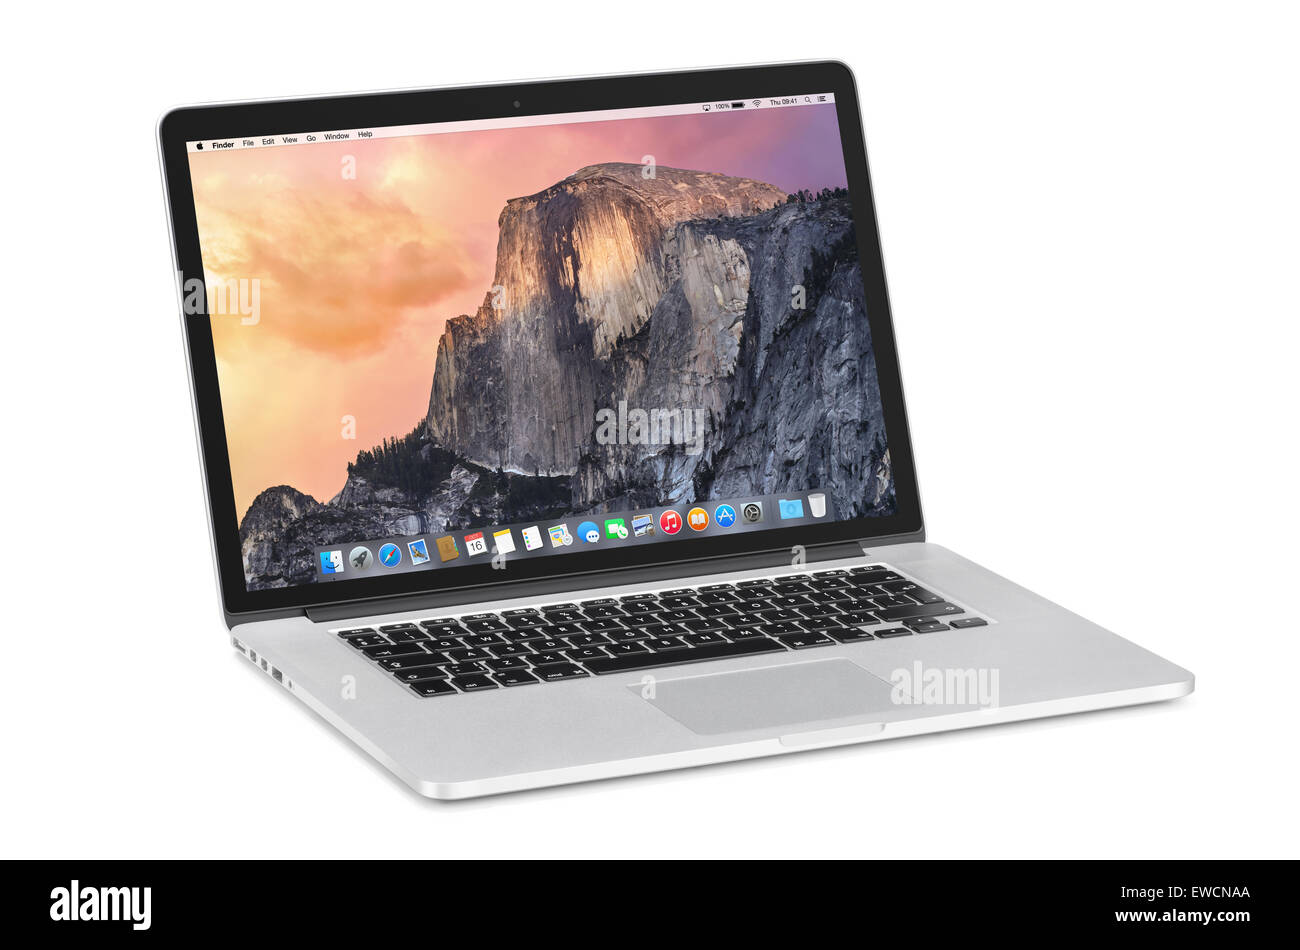 Varna, Bulgaria - November 03, 2013: Apple 15 inch MacBook Pro Retina with OS X Yosemite on the tilted back monitor. Isolated on Stock Photo